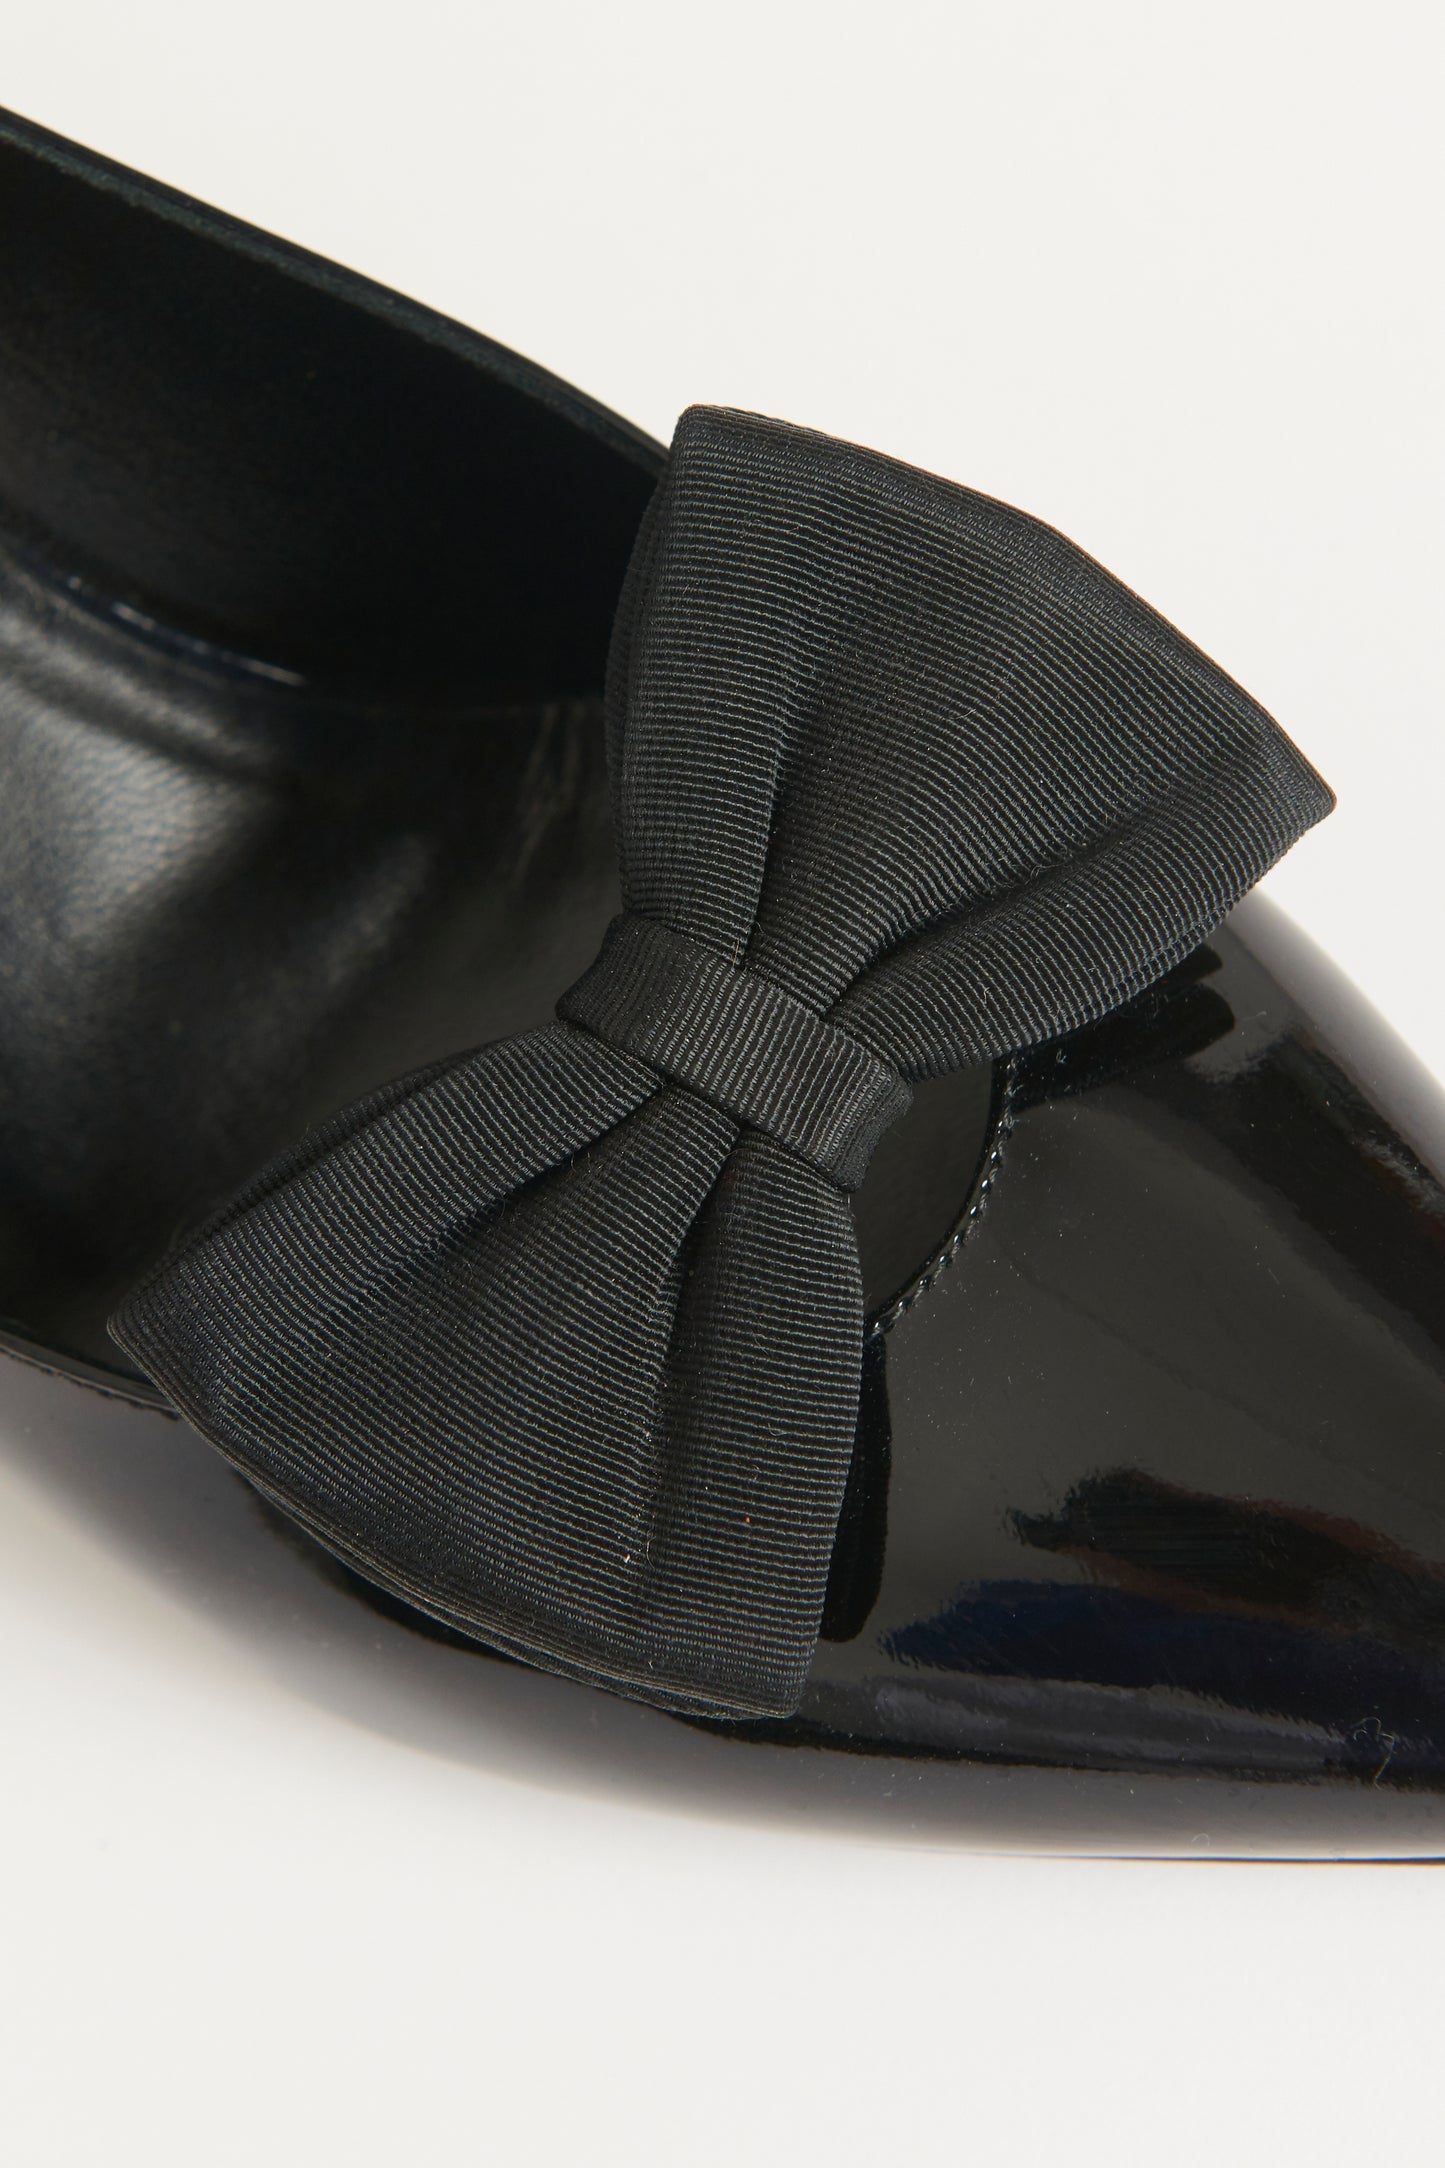 Black Patent Preowned Kitten Heels With Bow